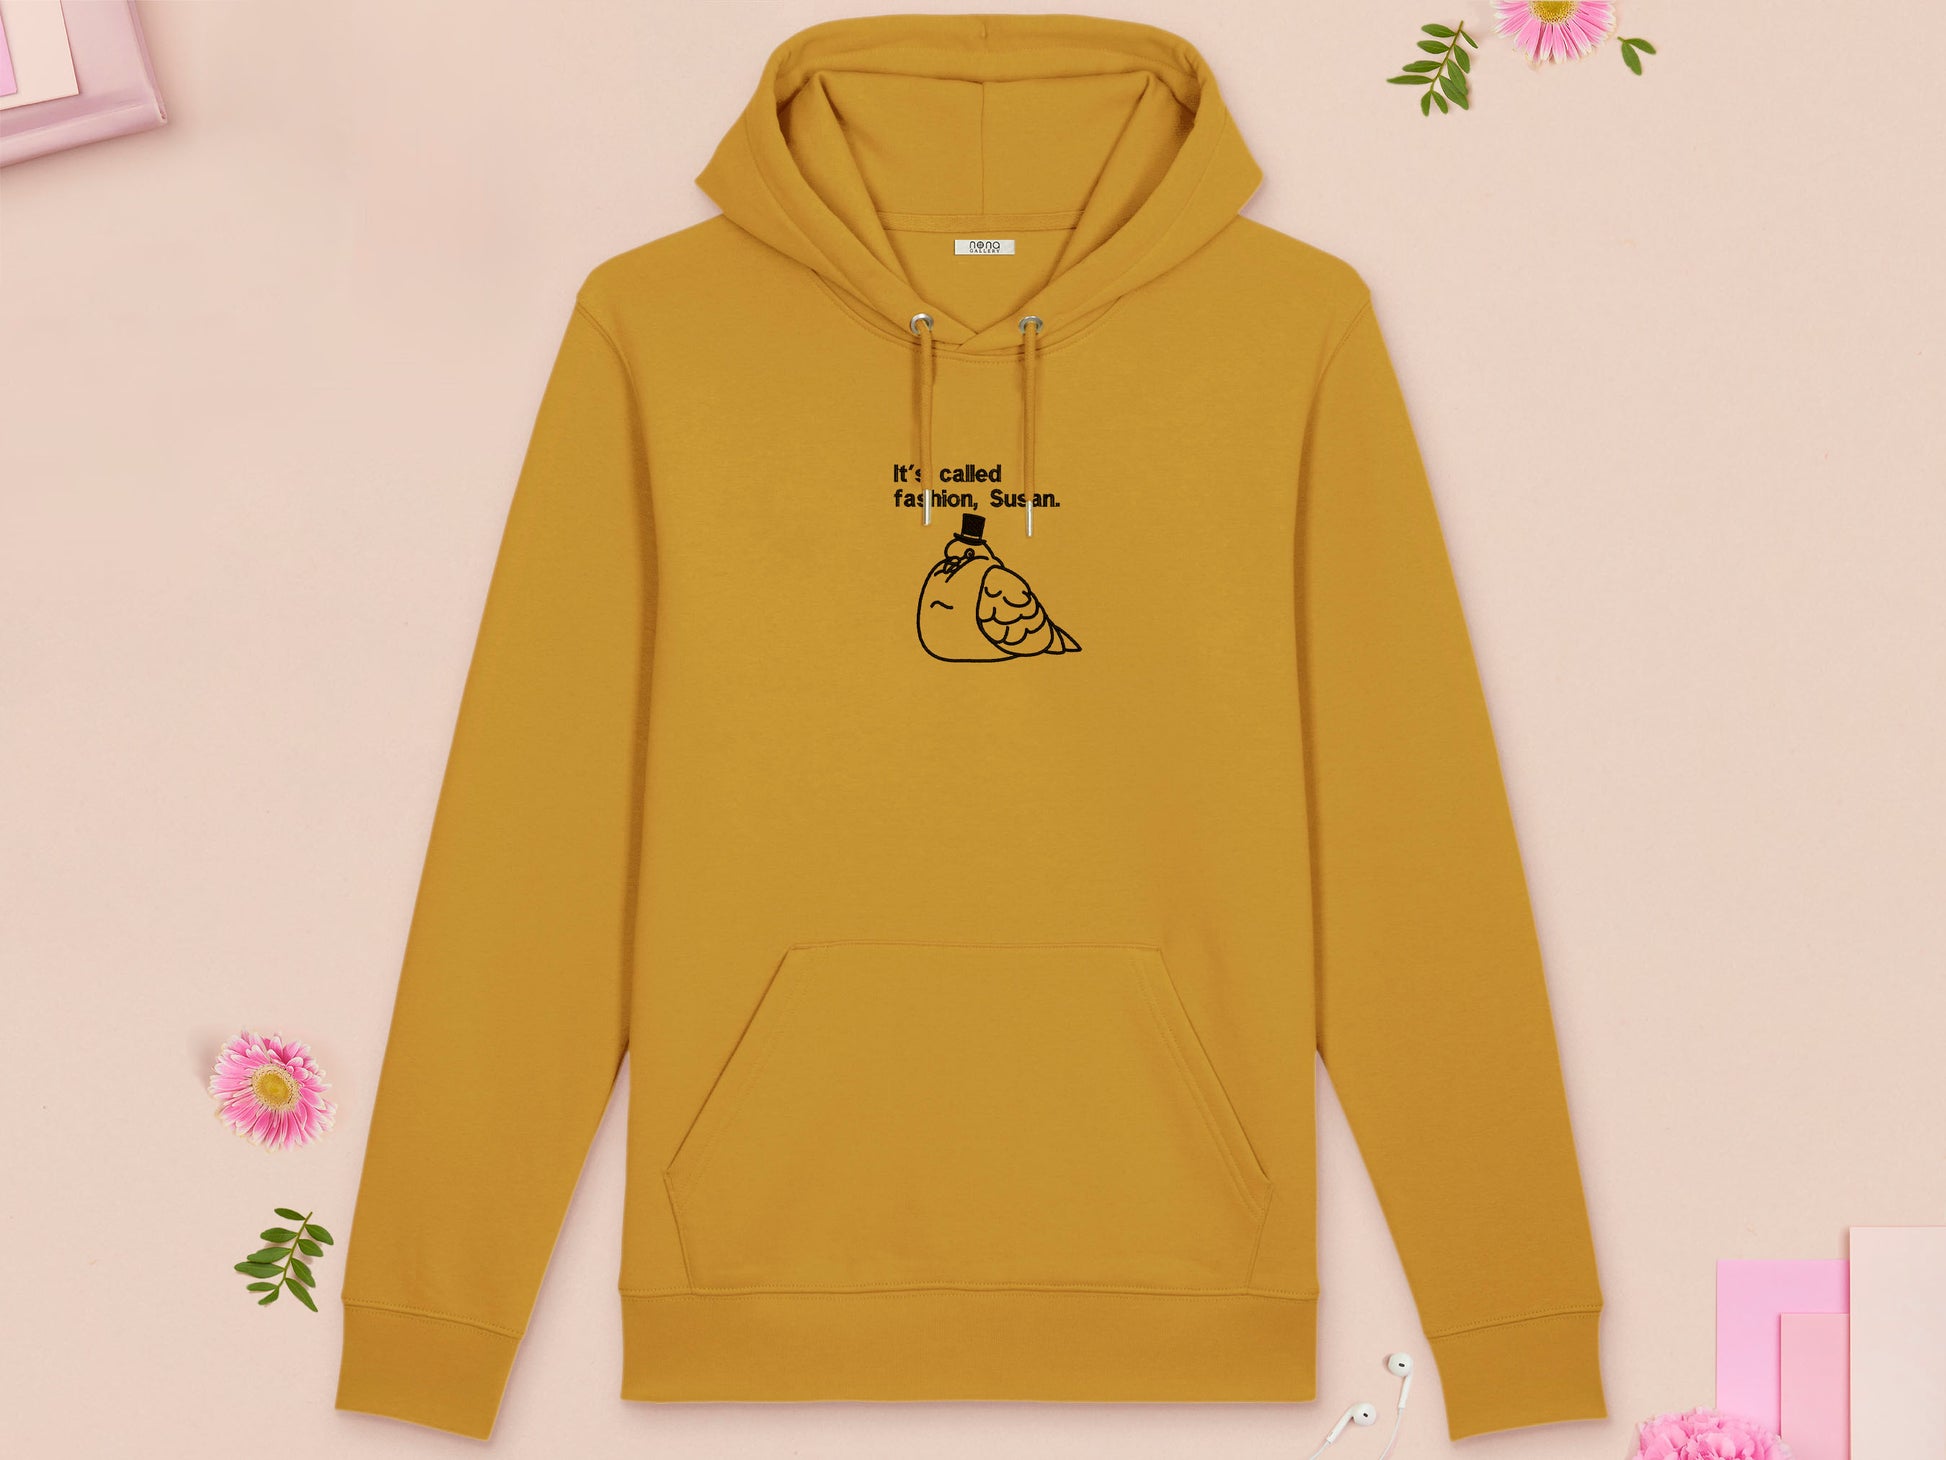 A yellow long sleeve fleece hoodie, with an embroidered black thread design of cute fat pigeon wearing a top hat with text underneath reading It's Called Fashion, Susan.